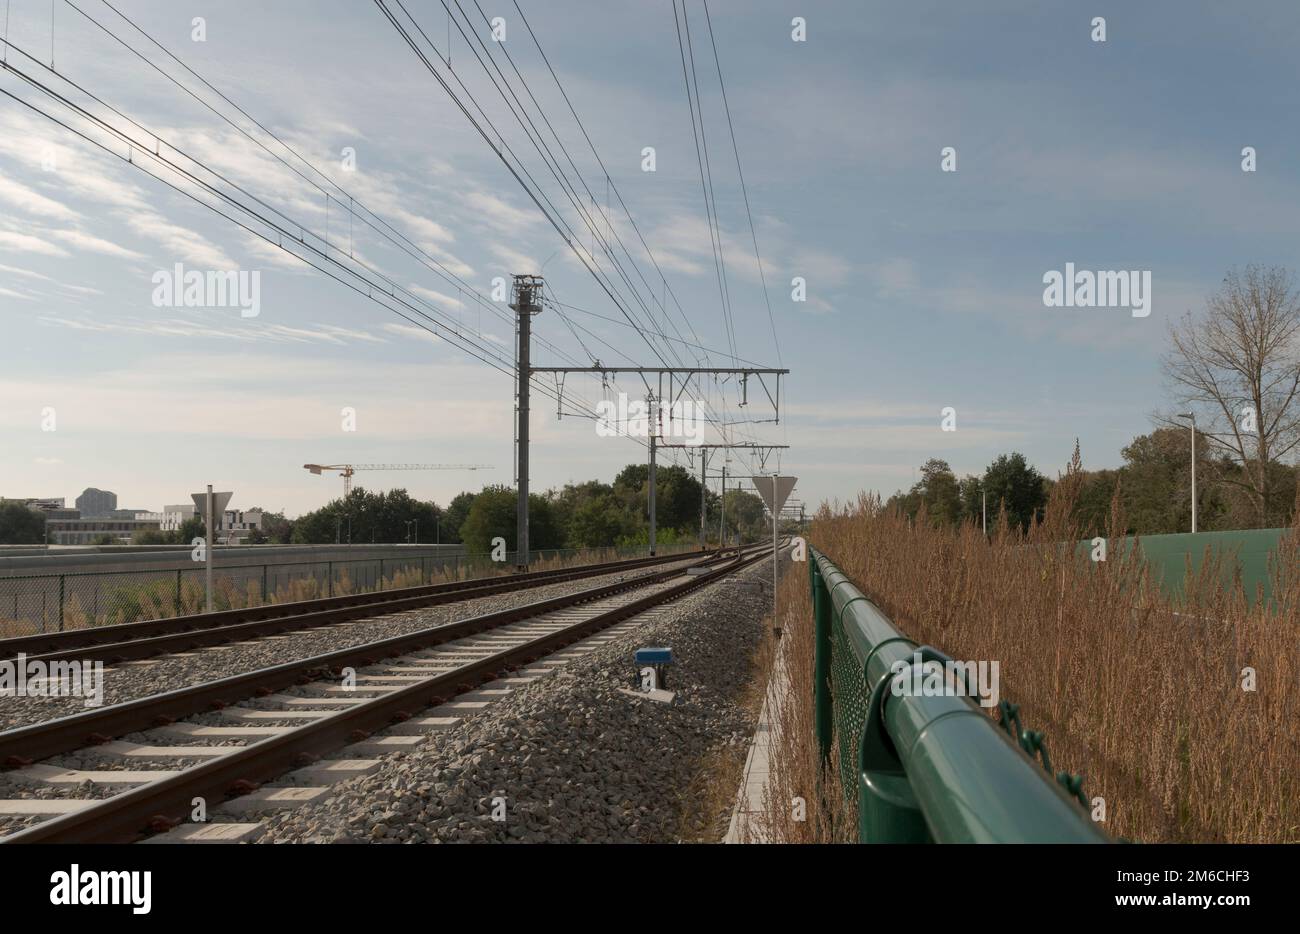 Fencing of railway tracks in the countryside Stock Photo